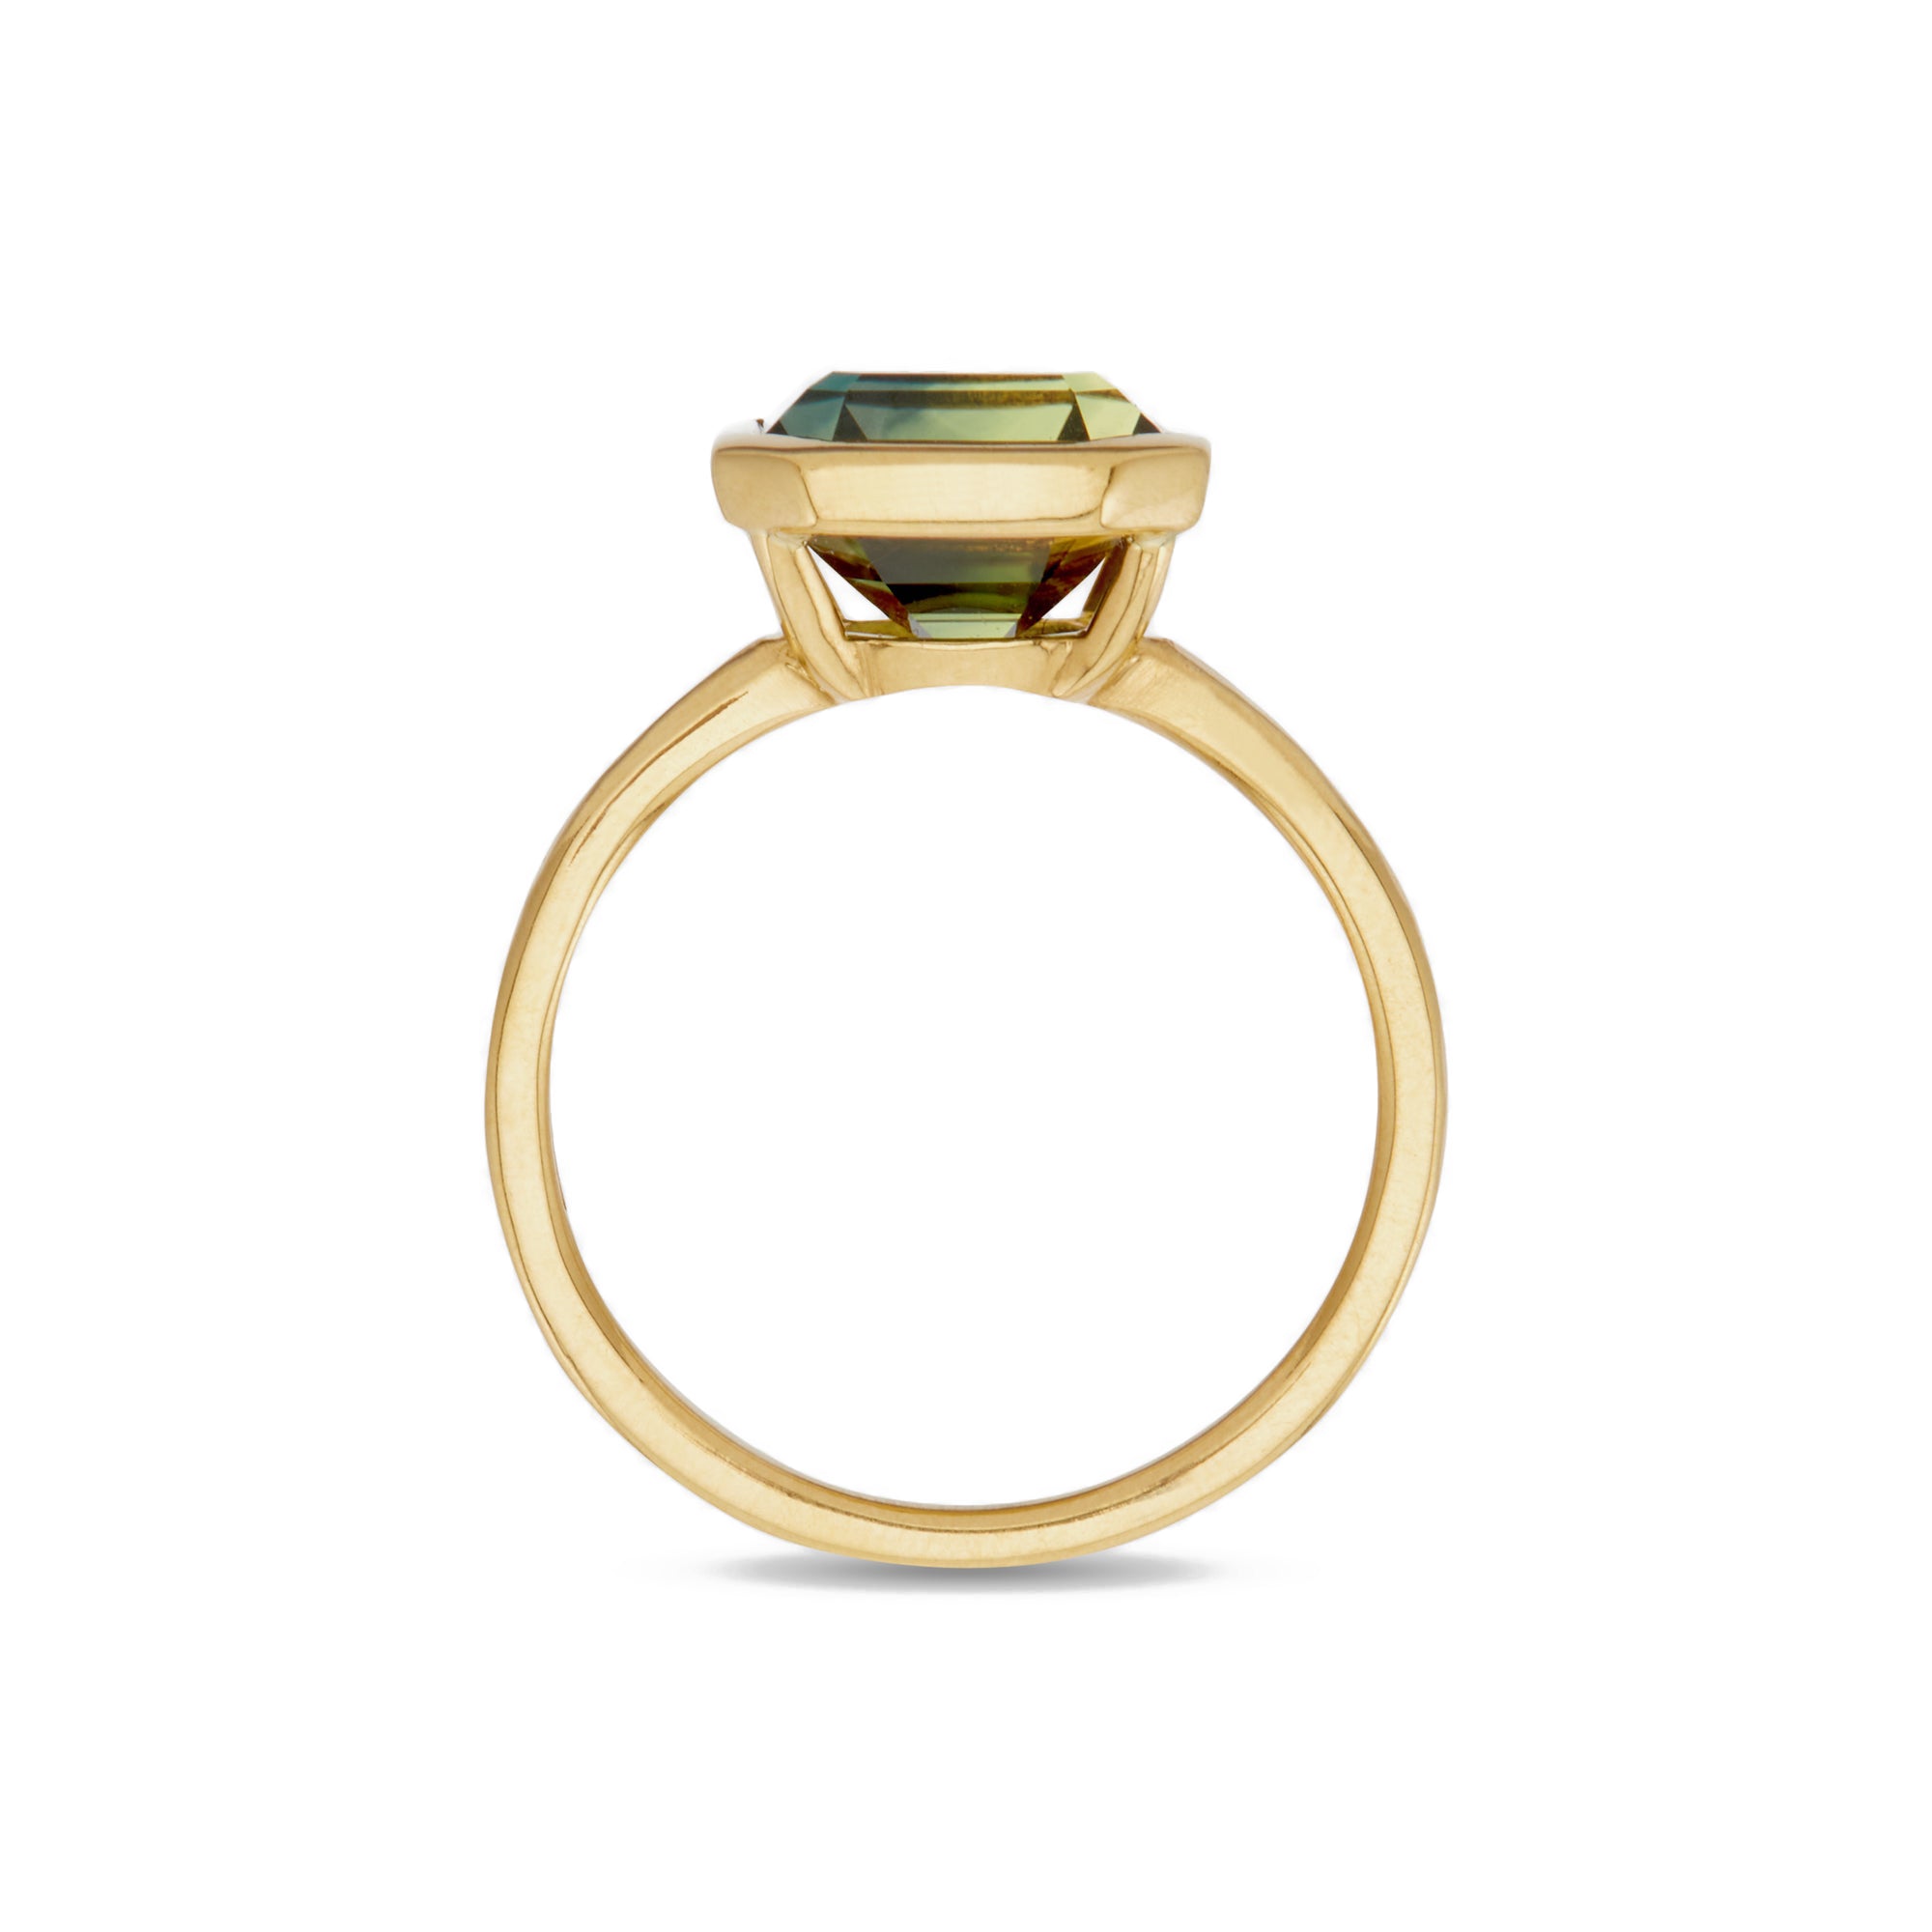 William Welstead - Unheated Green Sapphire Ring view 3